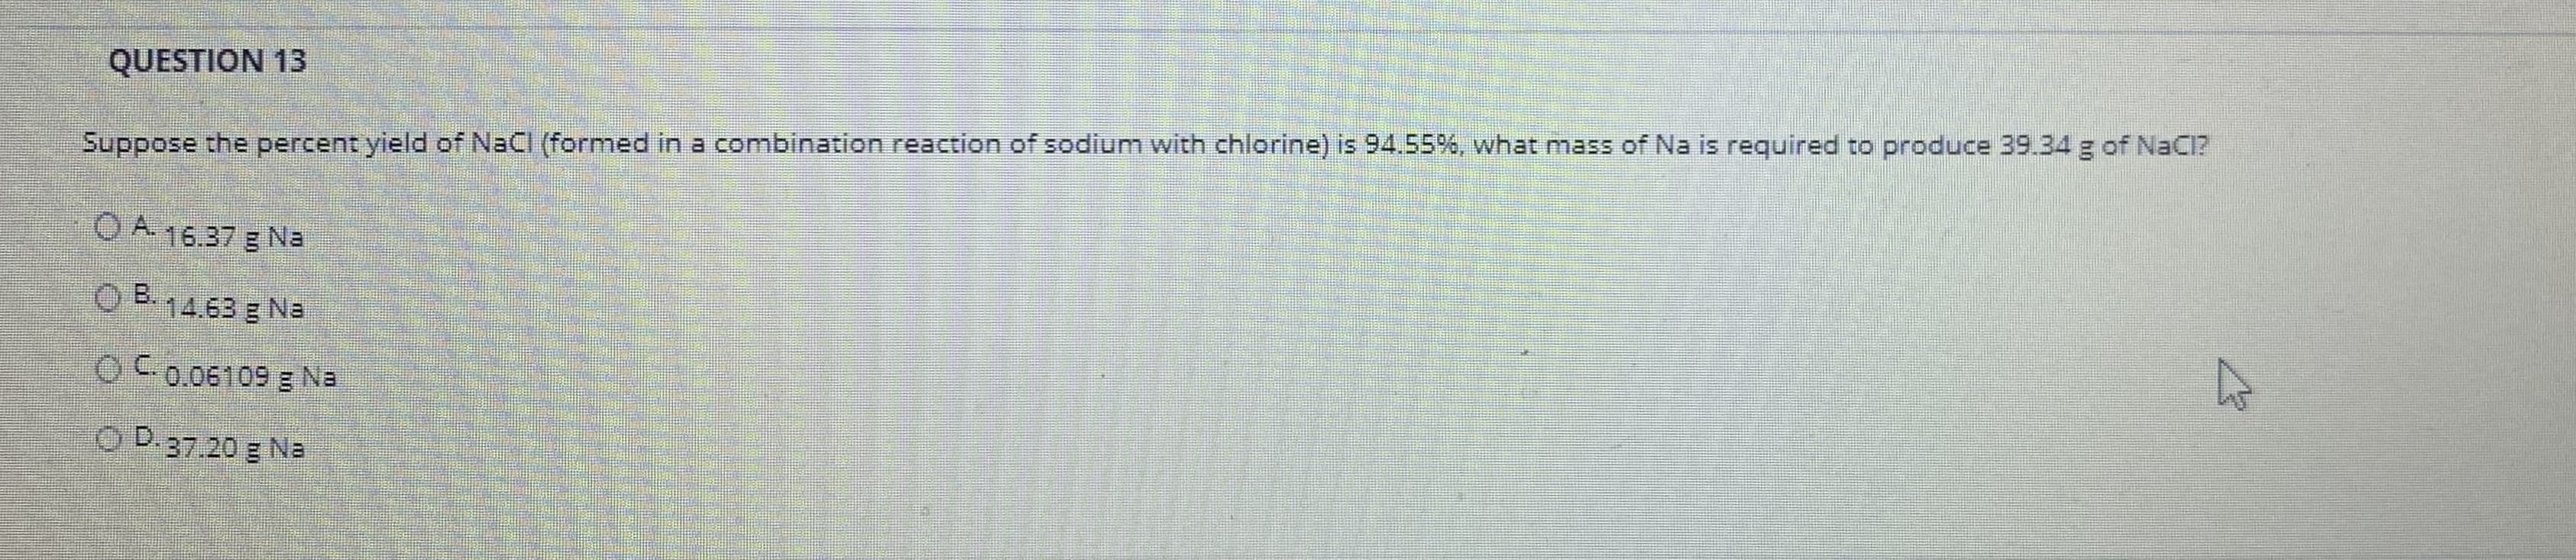 Suppose the percent yield of NaCI (formed in a combination reaction of sodium with chlorine) is 94.55%, what mass of Na is required to produce 39.34 g of NaCl?
OA 16.37 g Na
O B. .
14.63 g Na
